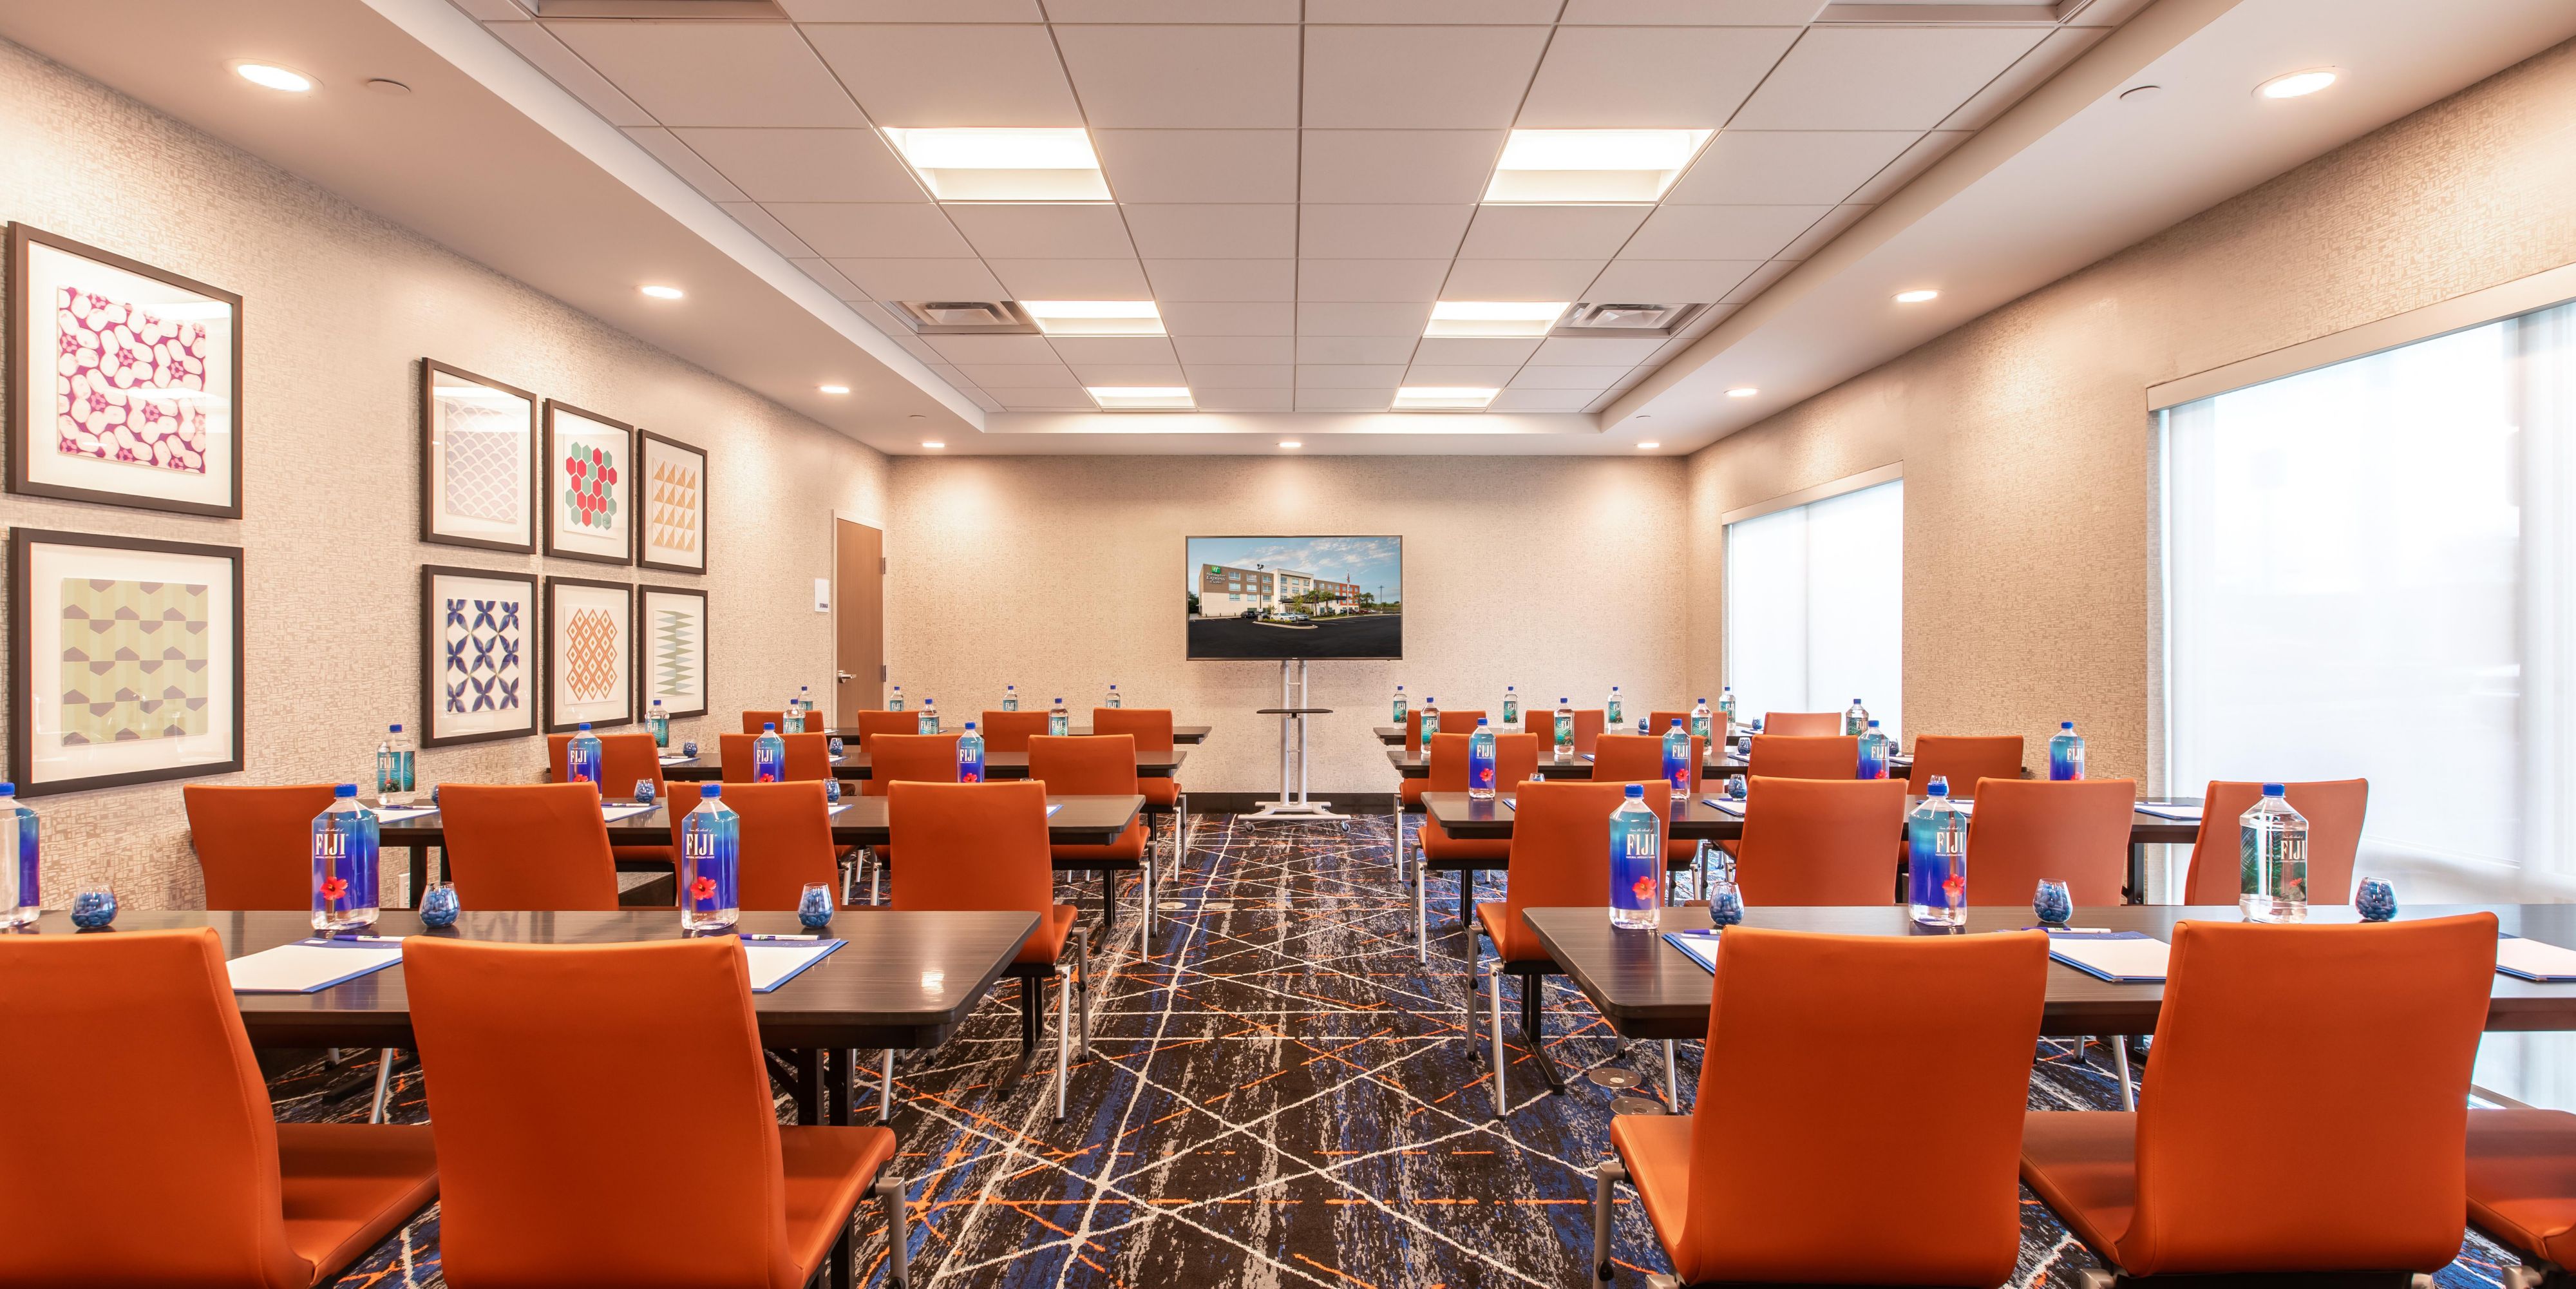 We would love to host your events and meetings. Our meeting room is 800 Square Feet and we can accommodate any style of meeting. Catering options are available. Please visit our website or give us a call. We can also accommodate wedding & family reunions for group room blocks.